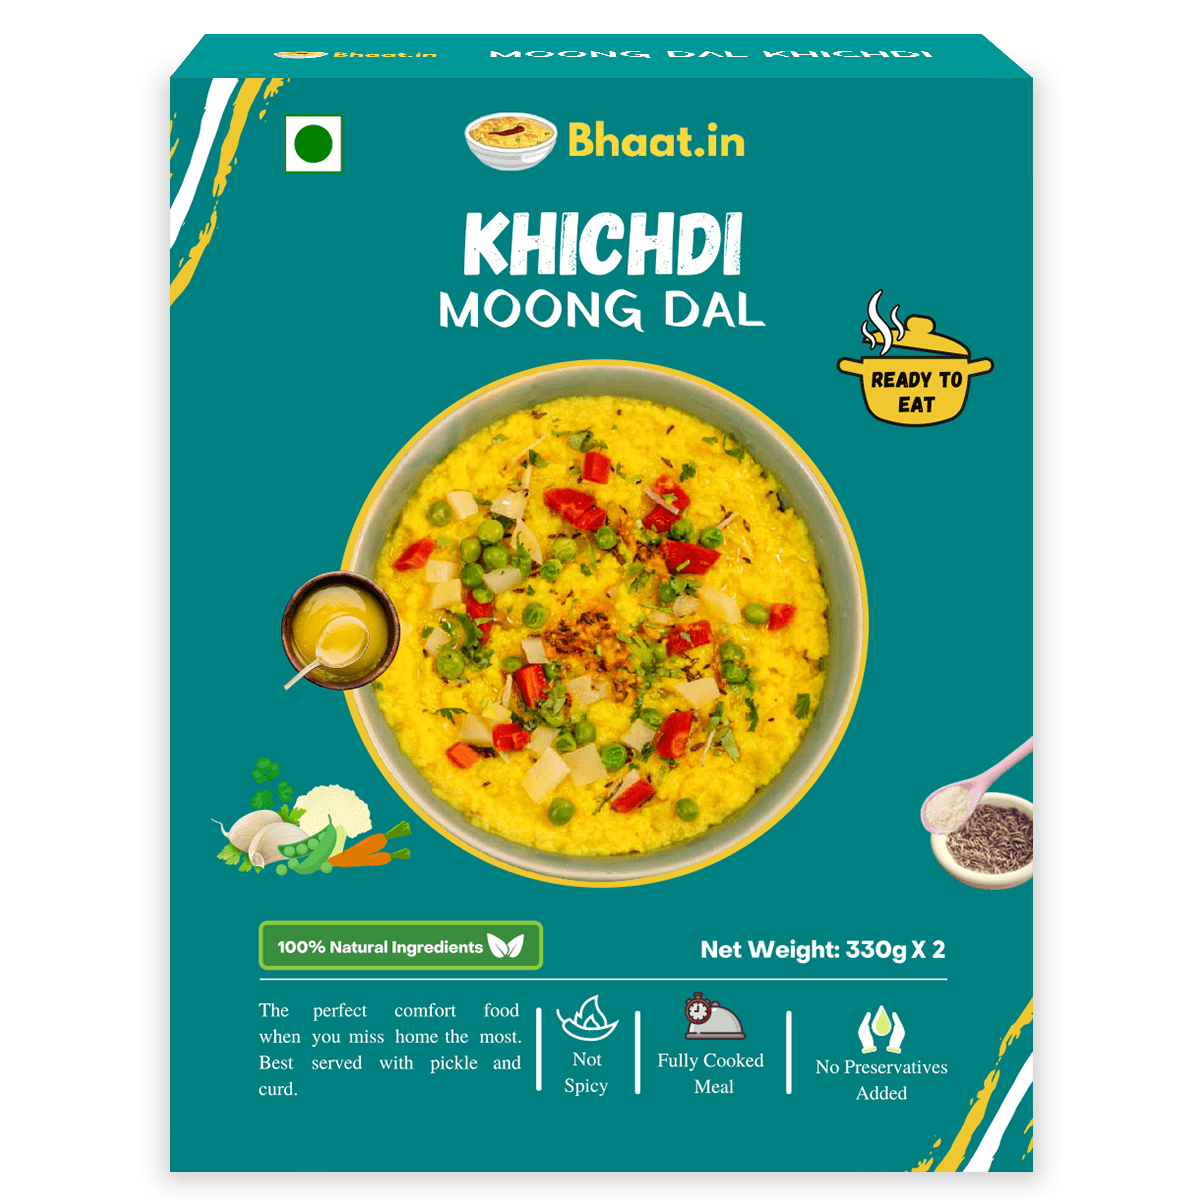 Pack of 2 - Ready to Eat - Moong Dal Khichdi - Bhaat.in